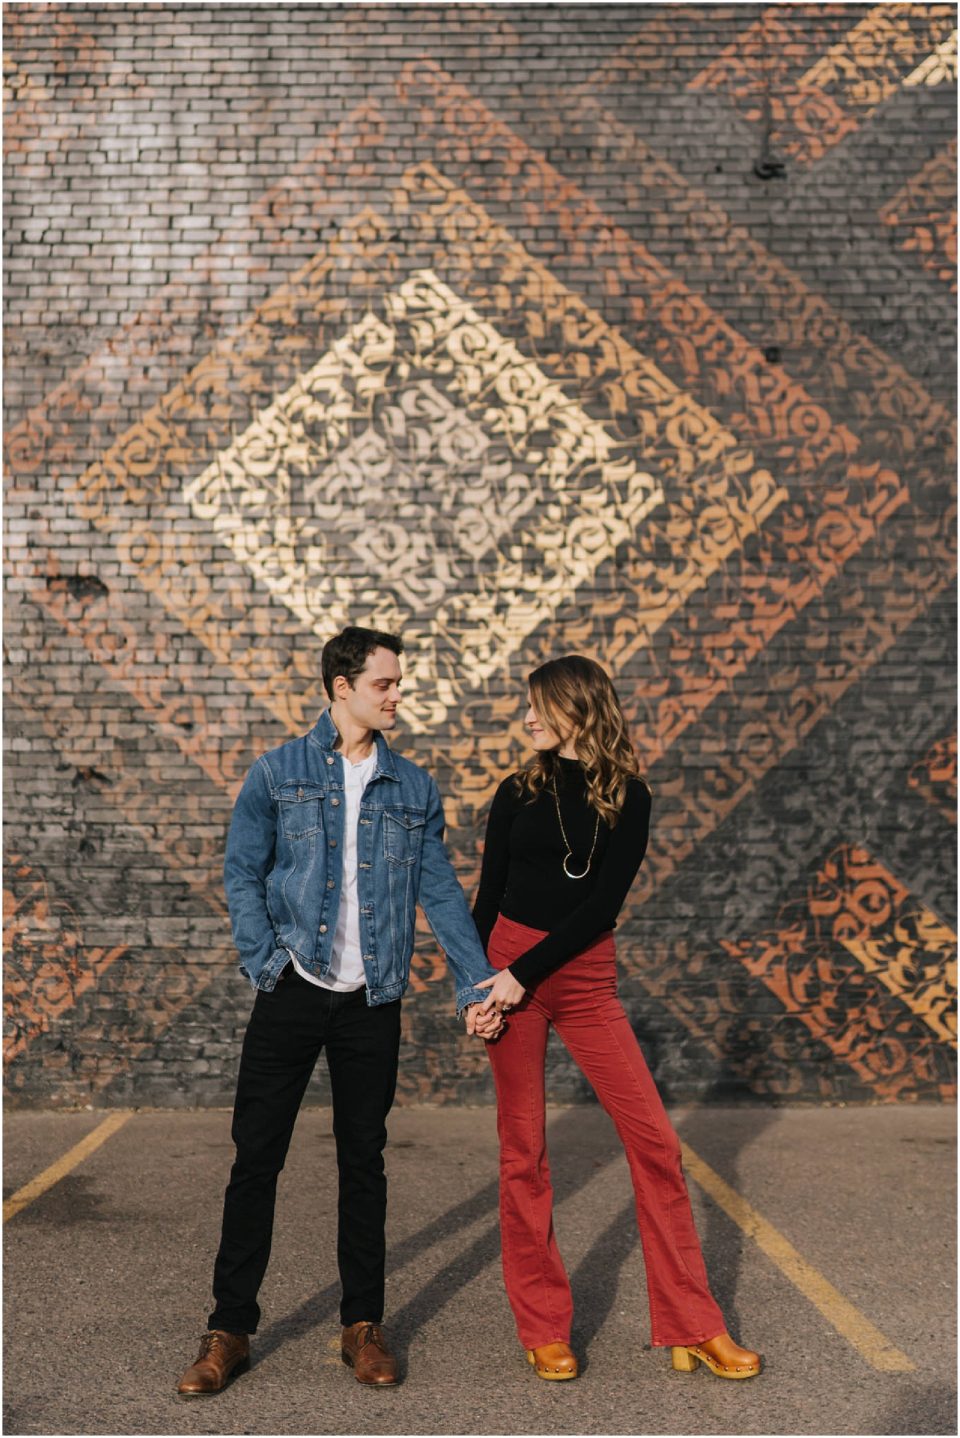 cryptik wall art engagement session